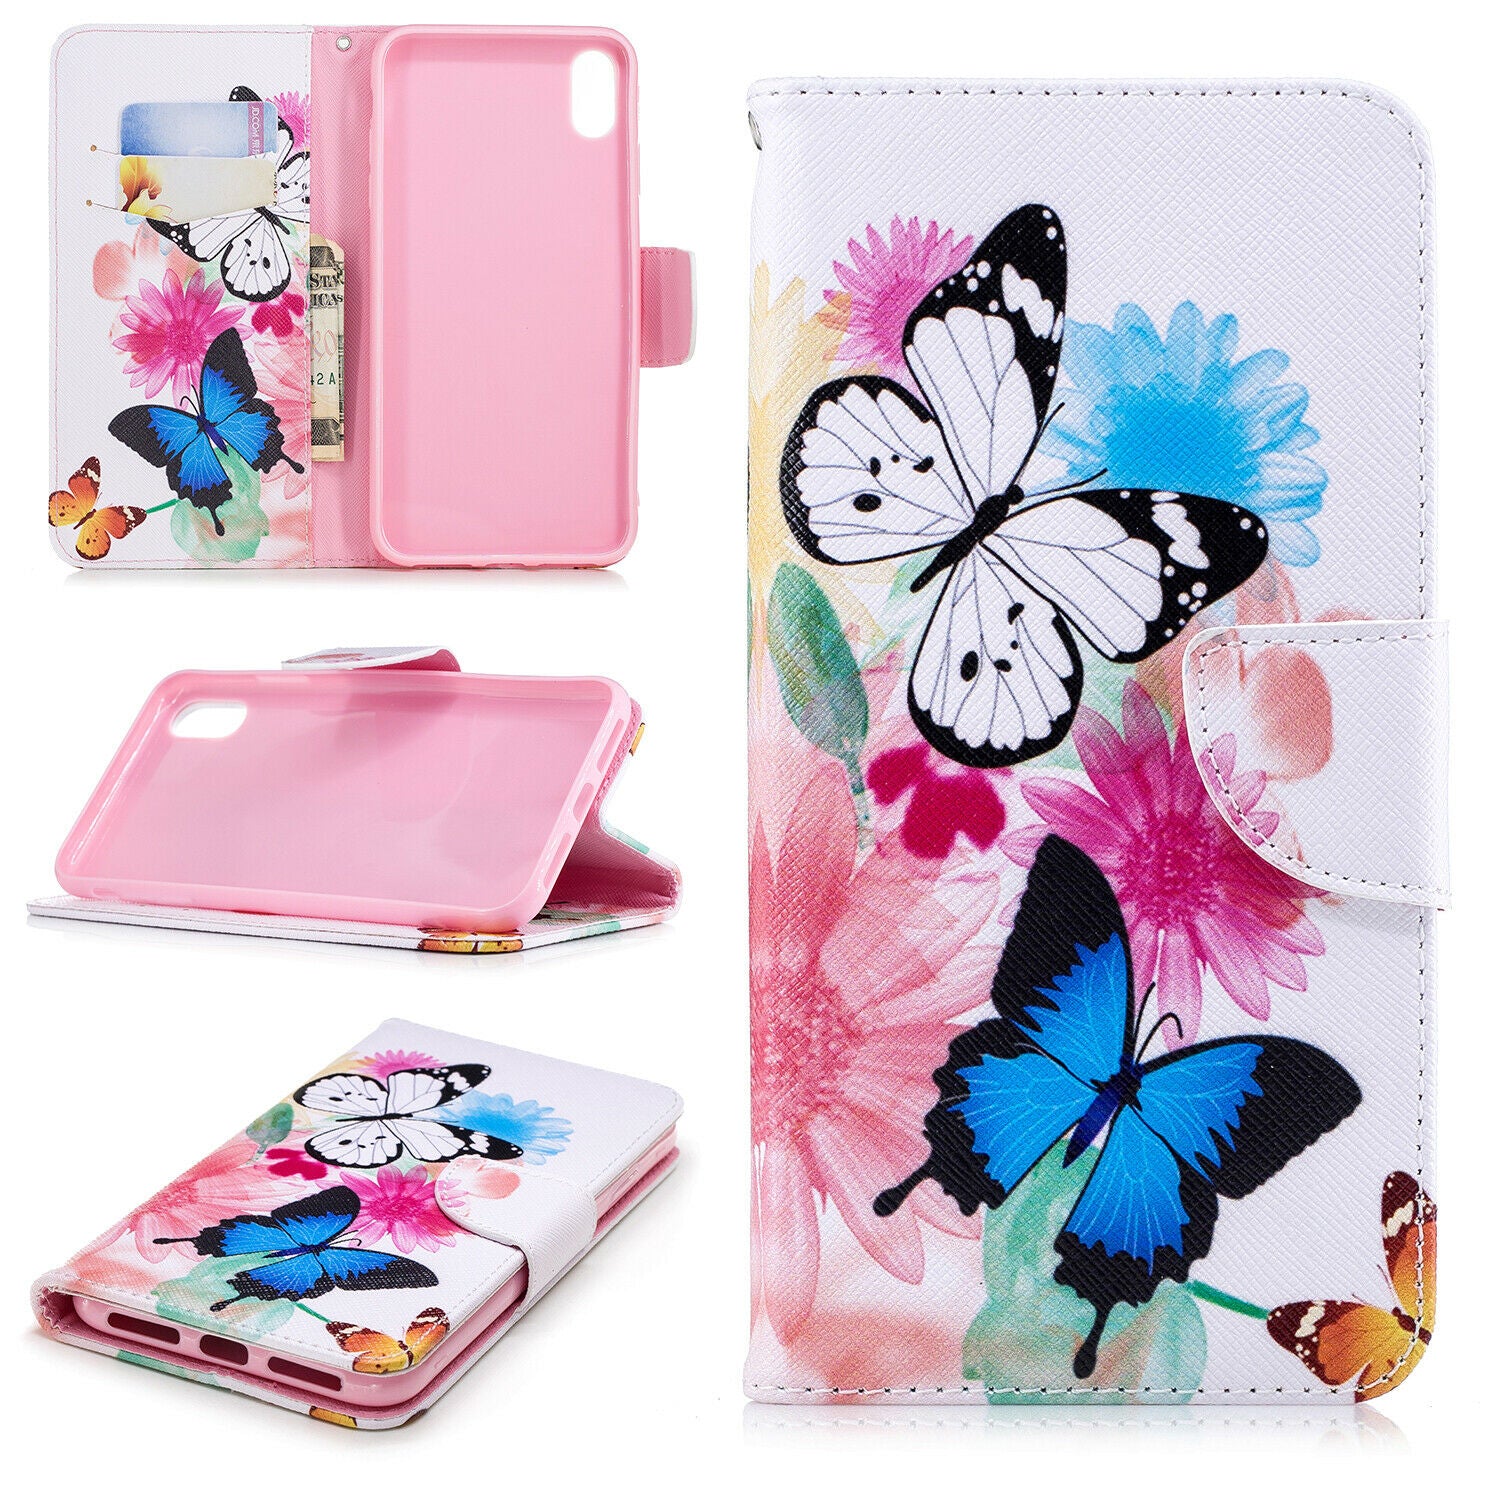 Samsung Galaxy A50 Wallet Leather Case Flip Magnetic Card Slot Cover-Beautiful Butterfiy